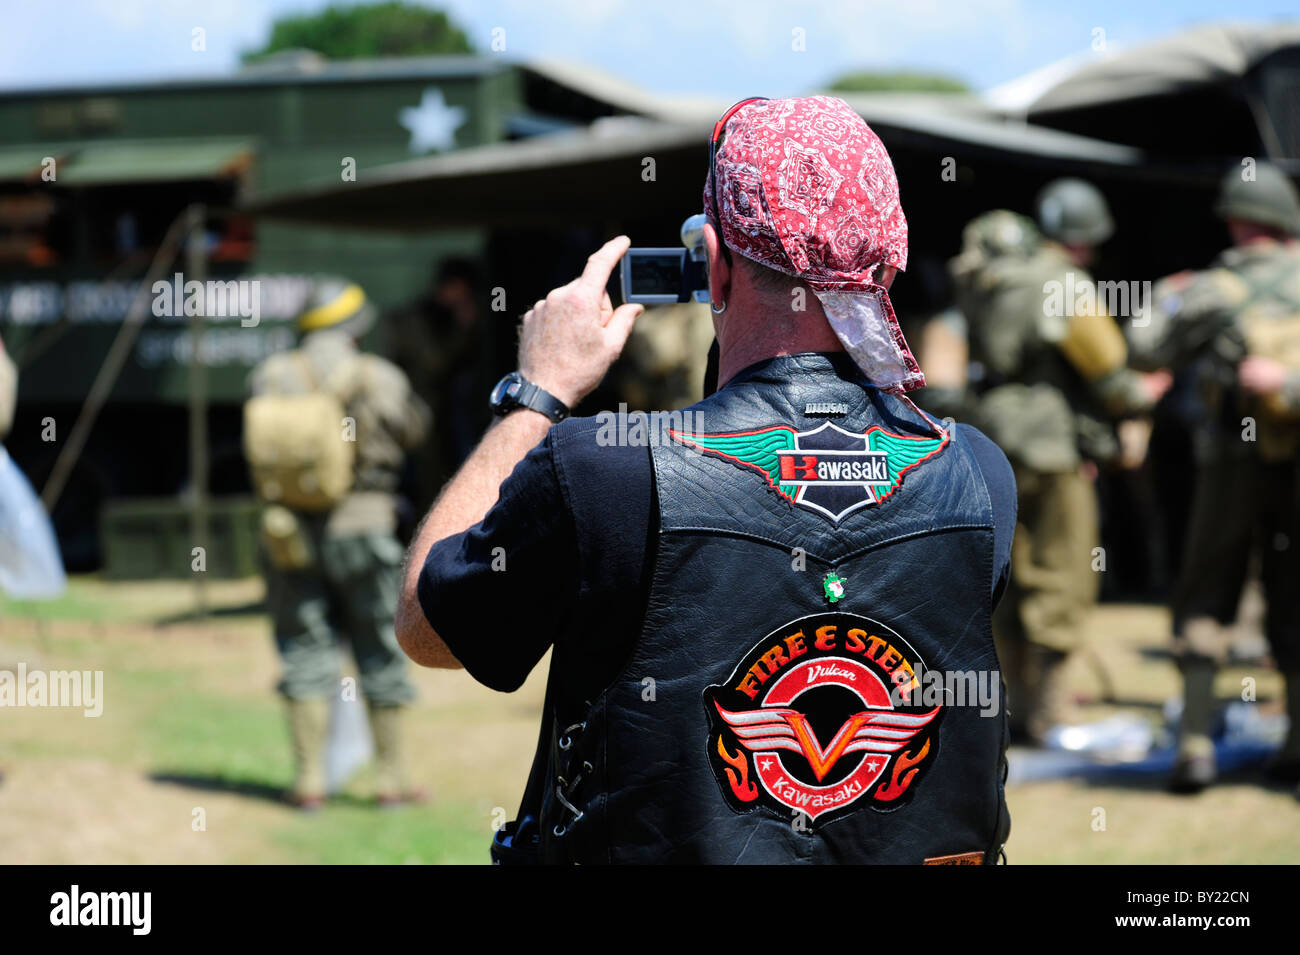 A Harley Davidson enthusiast photographs role players during a D-Day re-enactment at Lepe Country Park, New Forest, England, UK. Stock Photo